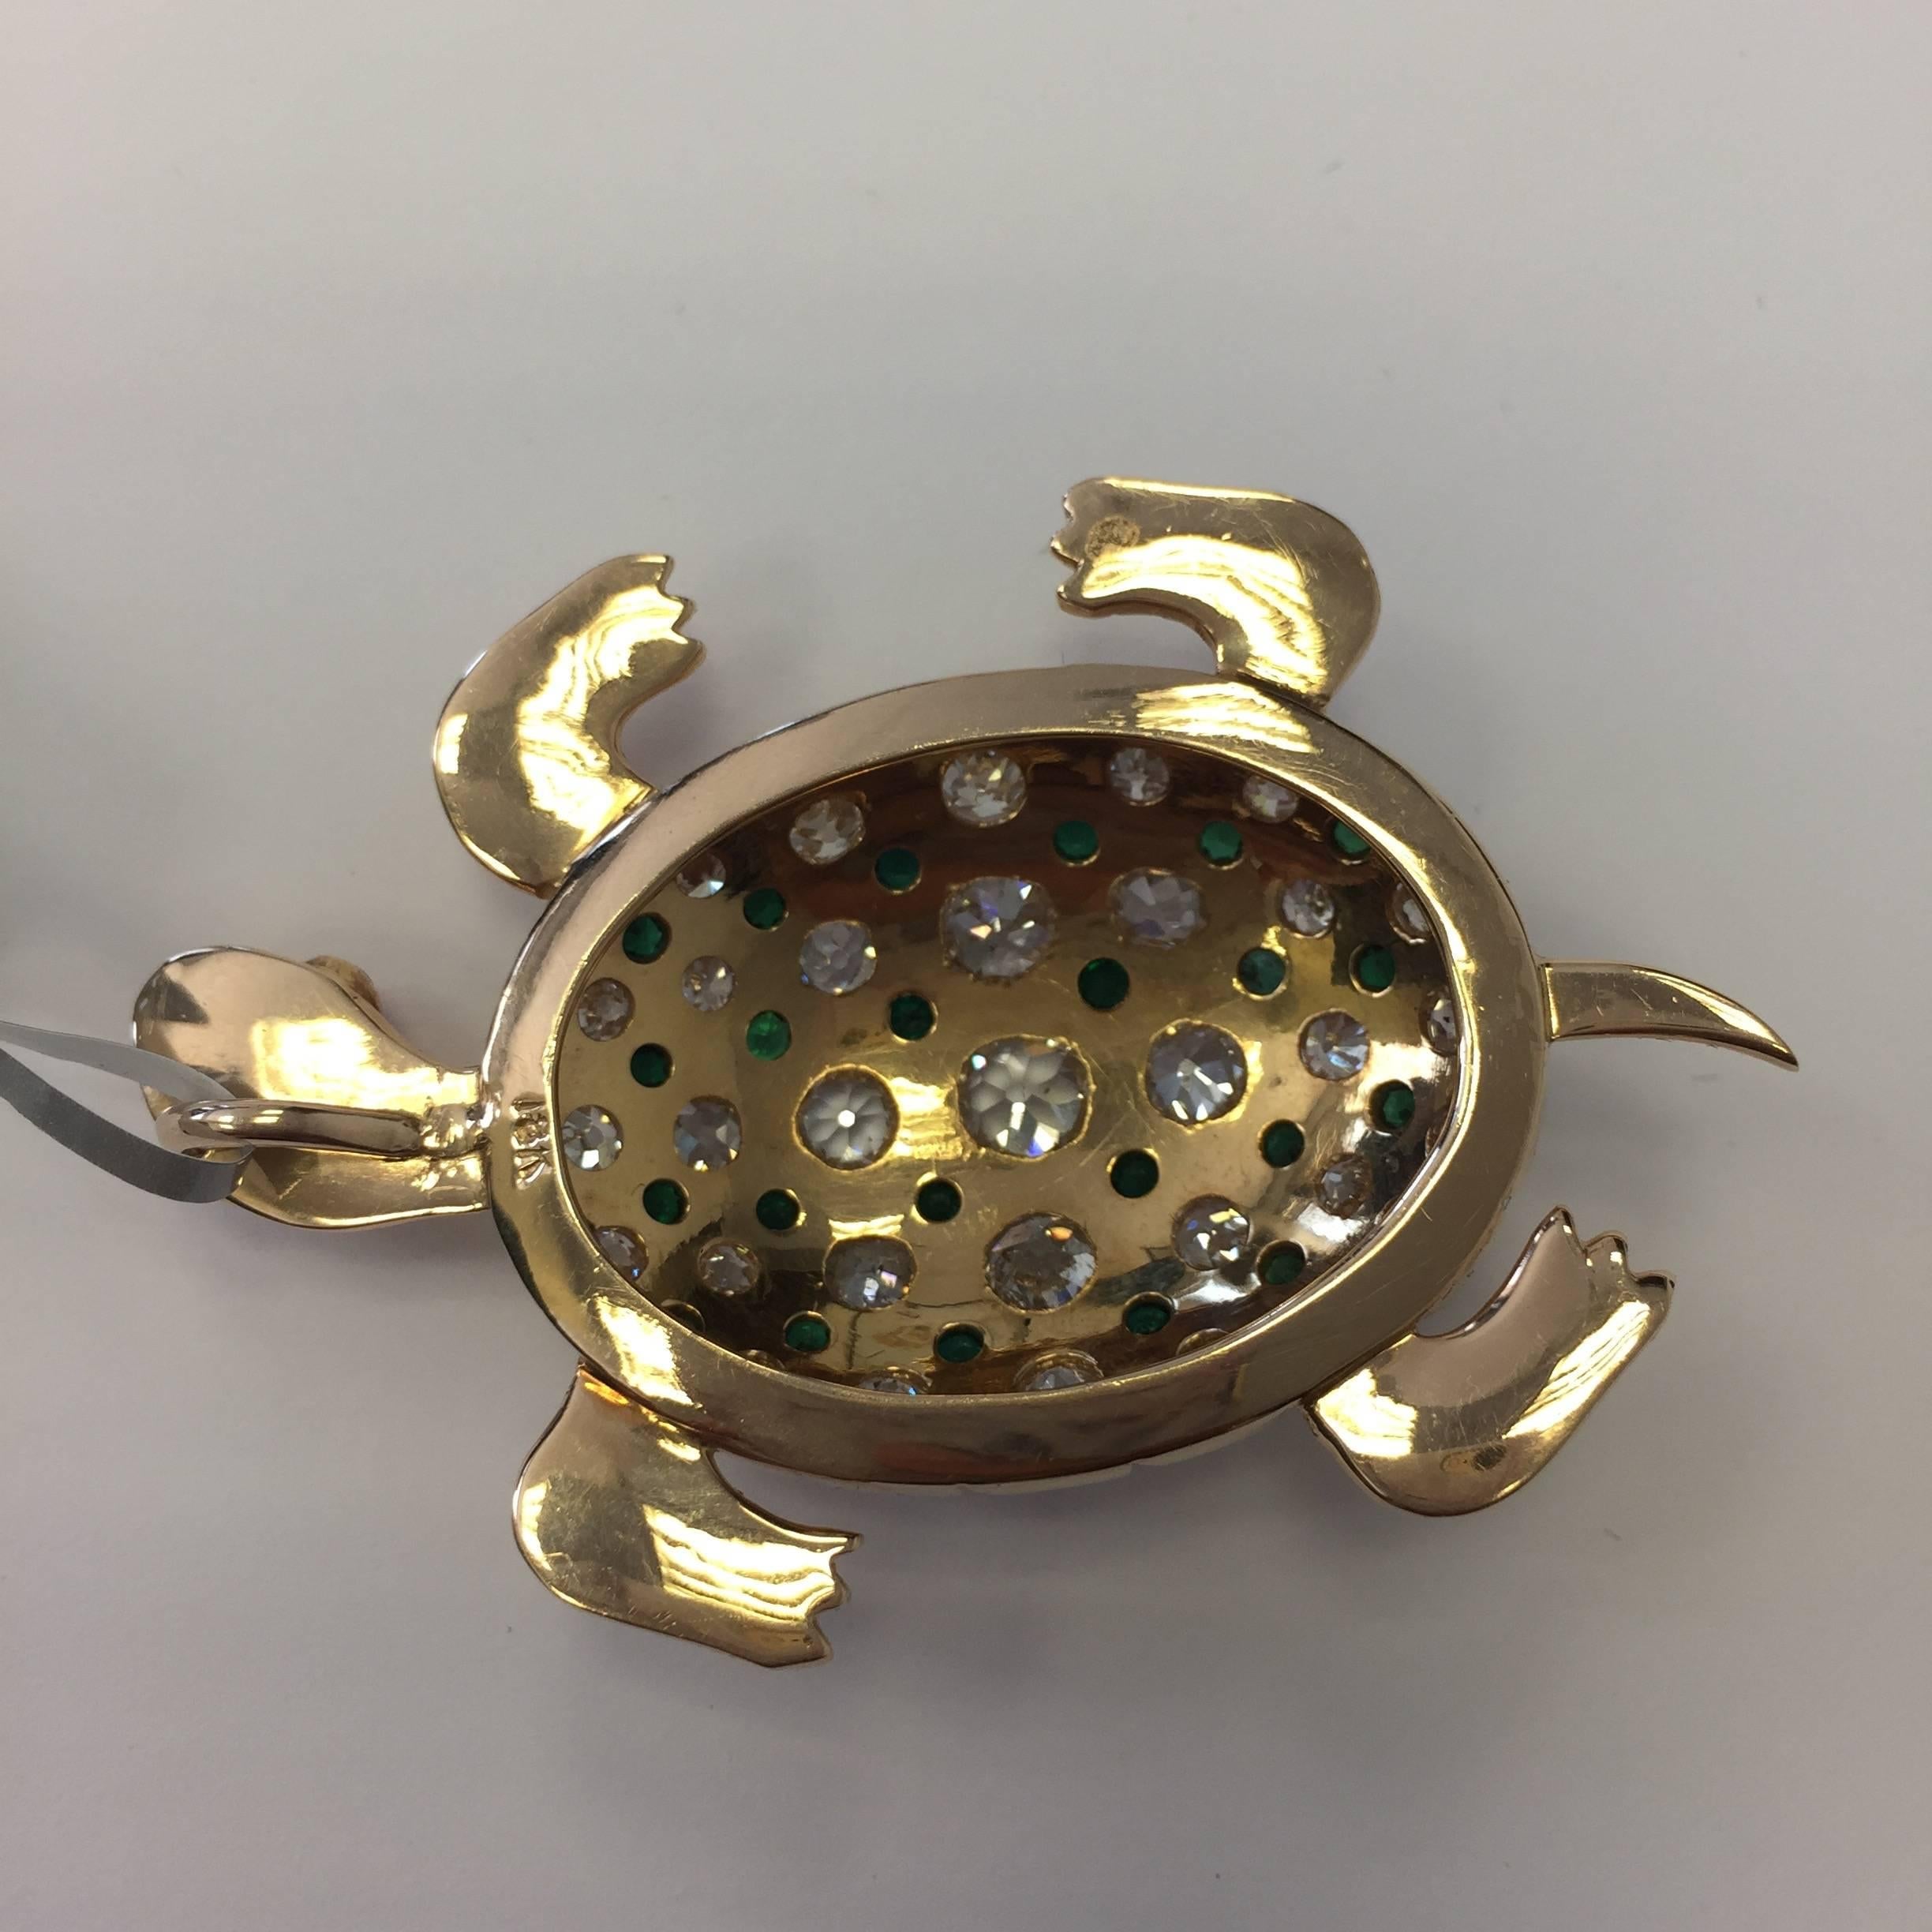 This ornate yet delicate turtle slider pendant showcases 6 carats of diamonds, 2.55 cts of green tsavorites, and pink tourmalines in 18k yellow gold.  Beautifully made and in excellent condition.